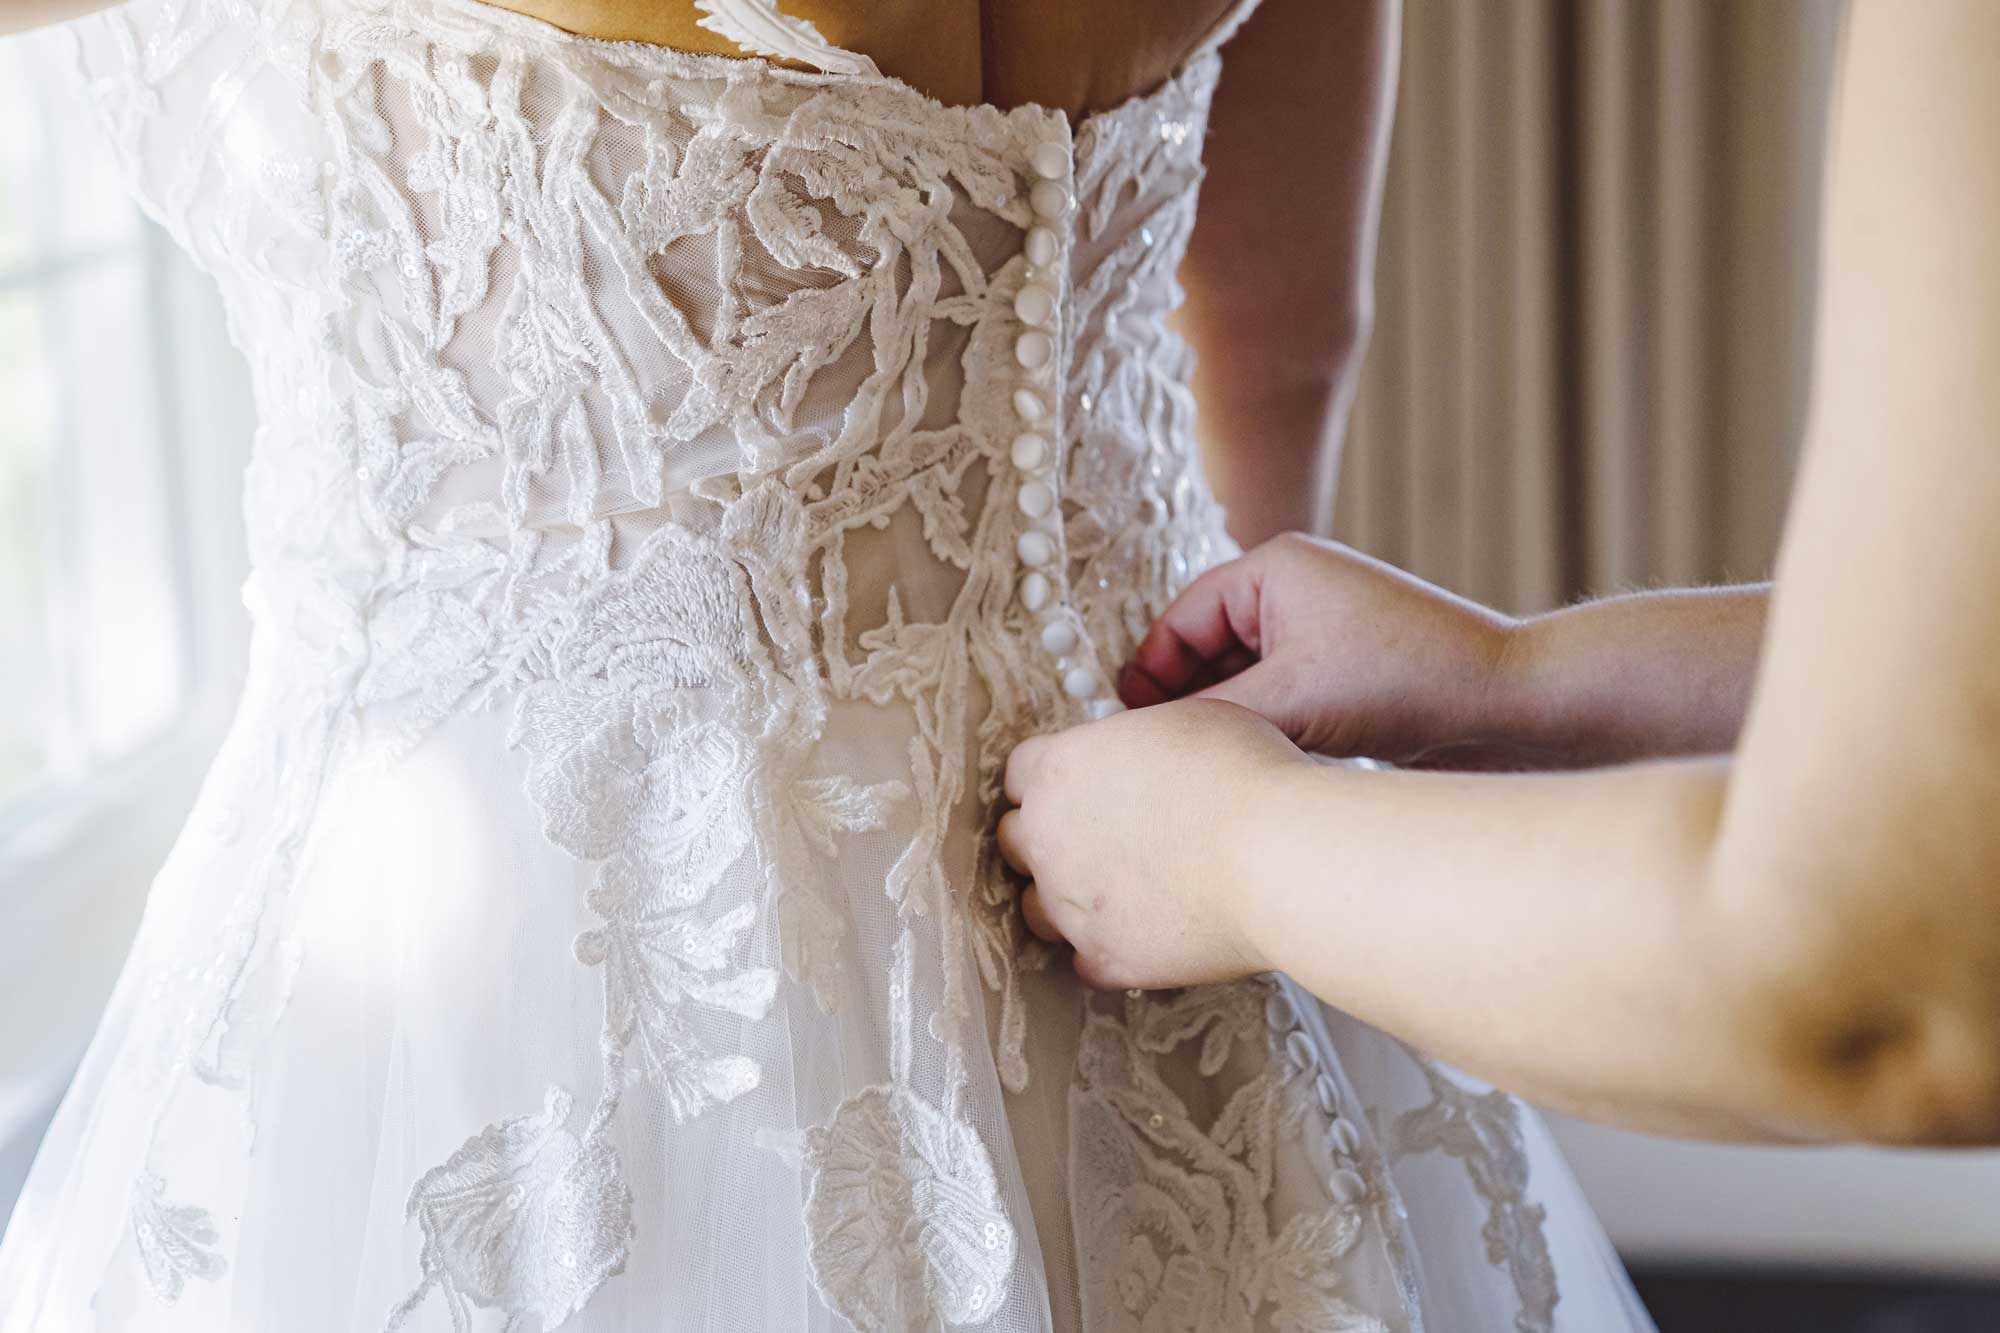 A woman is trying on wedding dresses at a bridal shop.